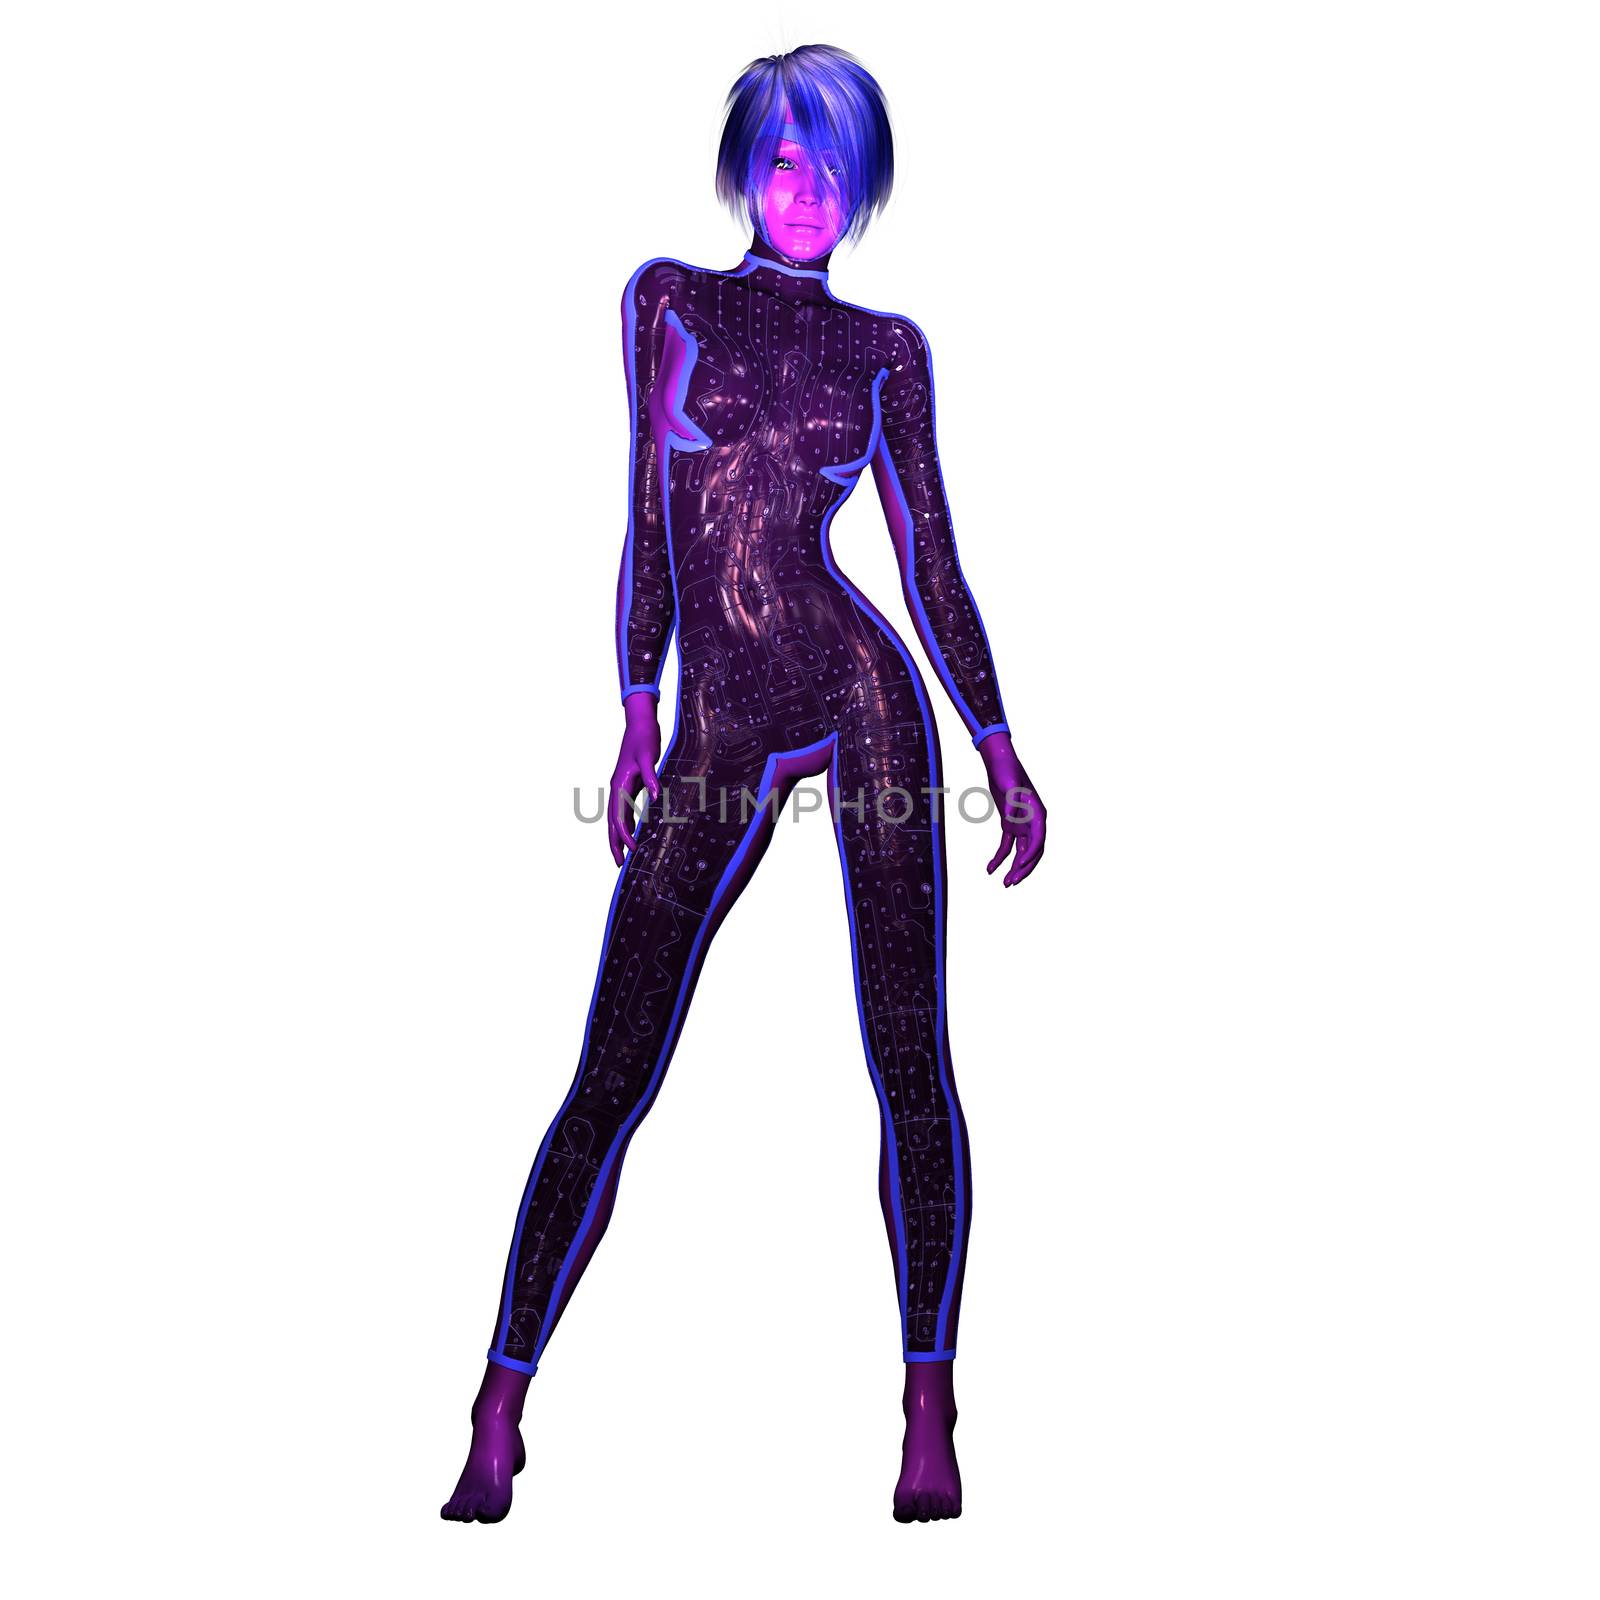 Digital 3D Illustration of a Science Fiction Female; Cutout on white Background